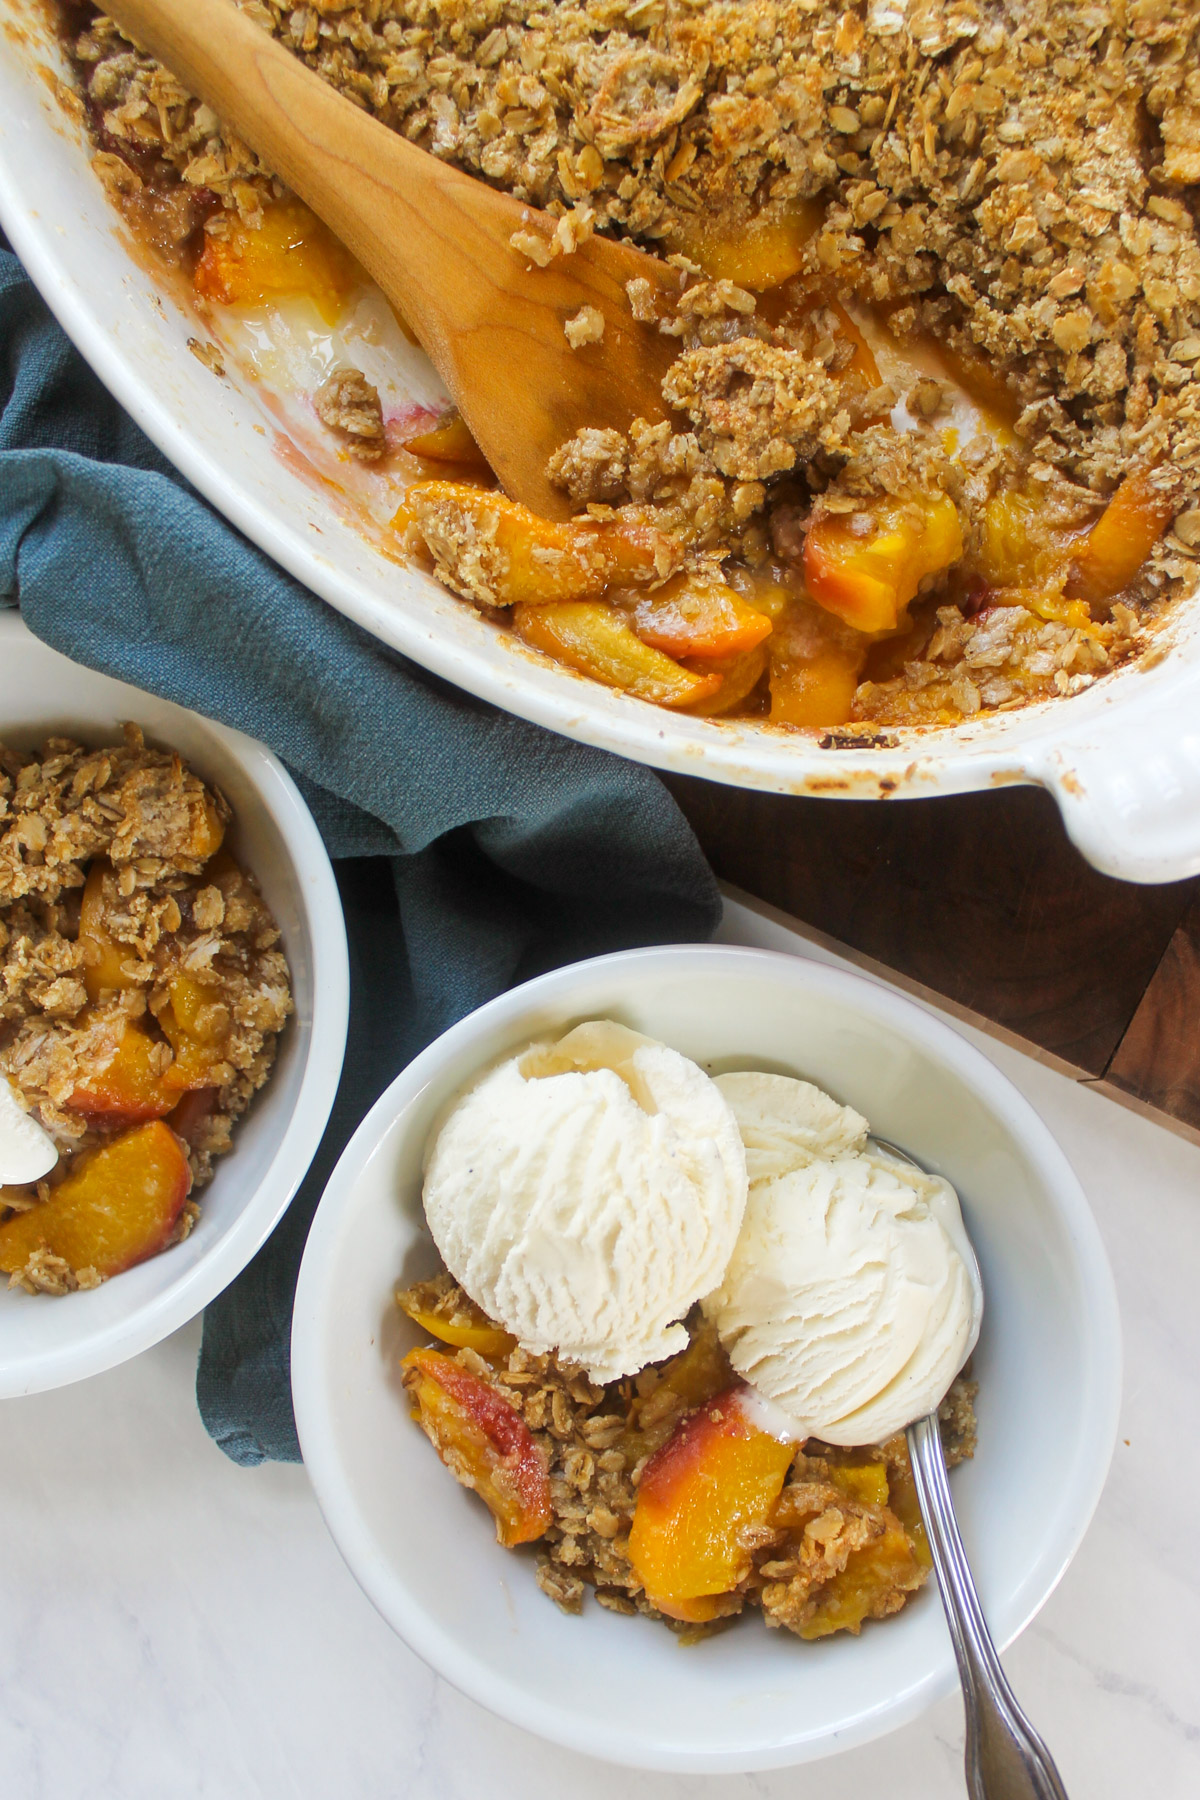 A bowl of peach crisp with vanilla ice cream next to the baking dish.